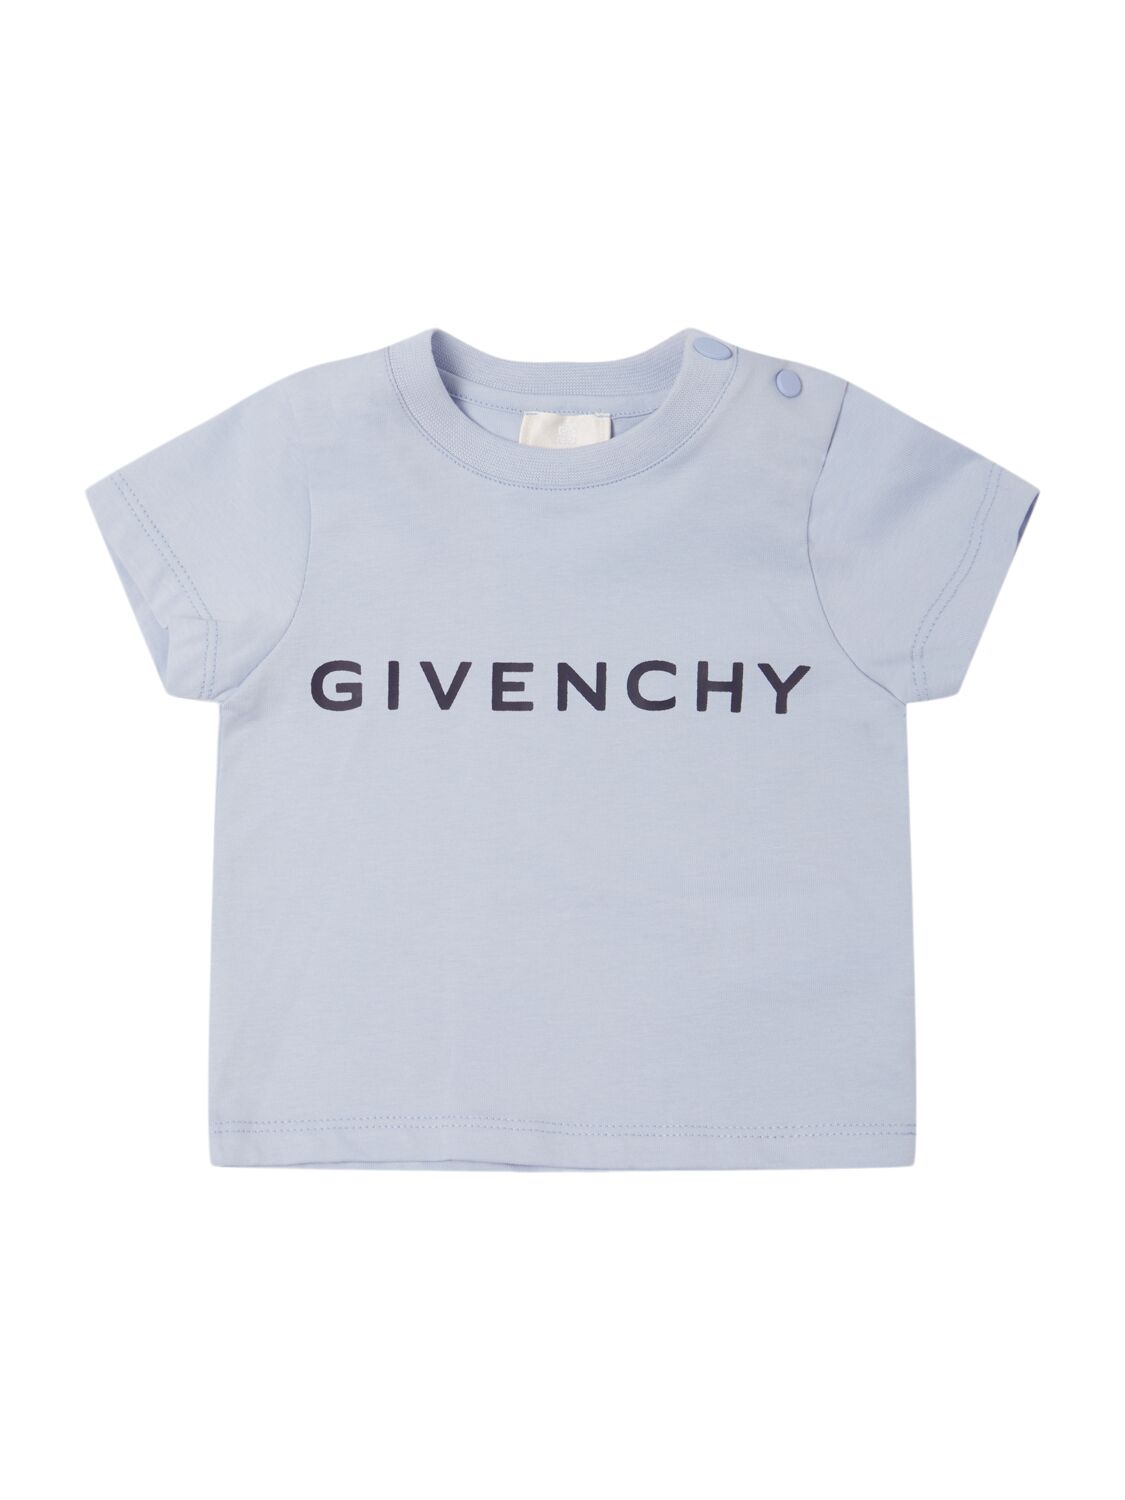 Givenchy Printed Cotton Jersey T-shirt In Blue